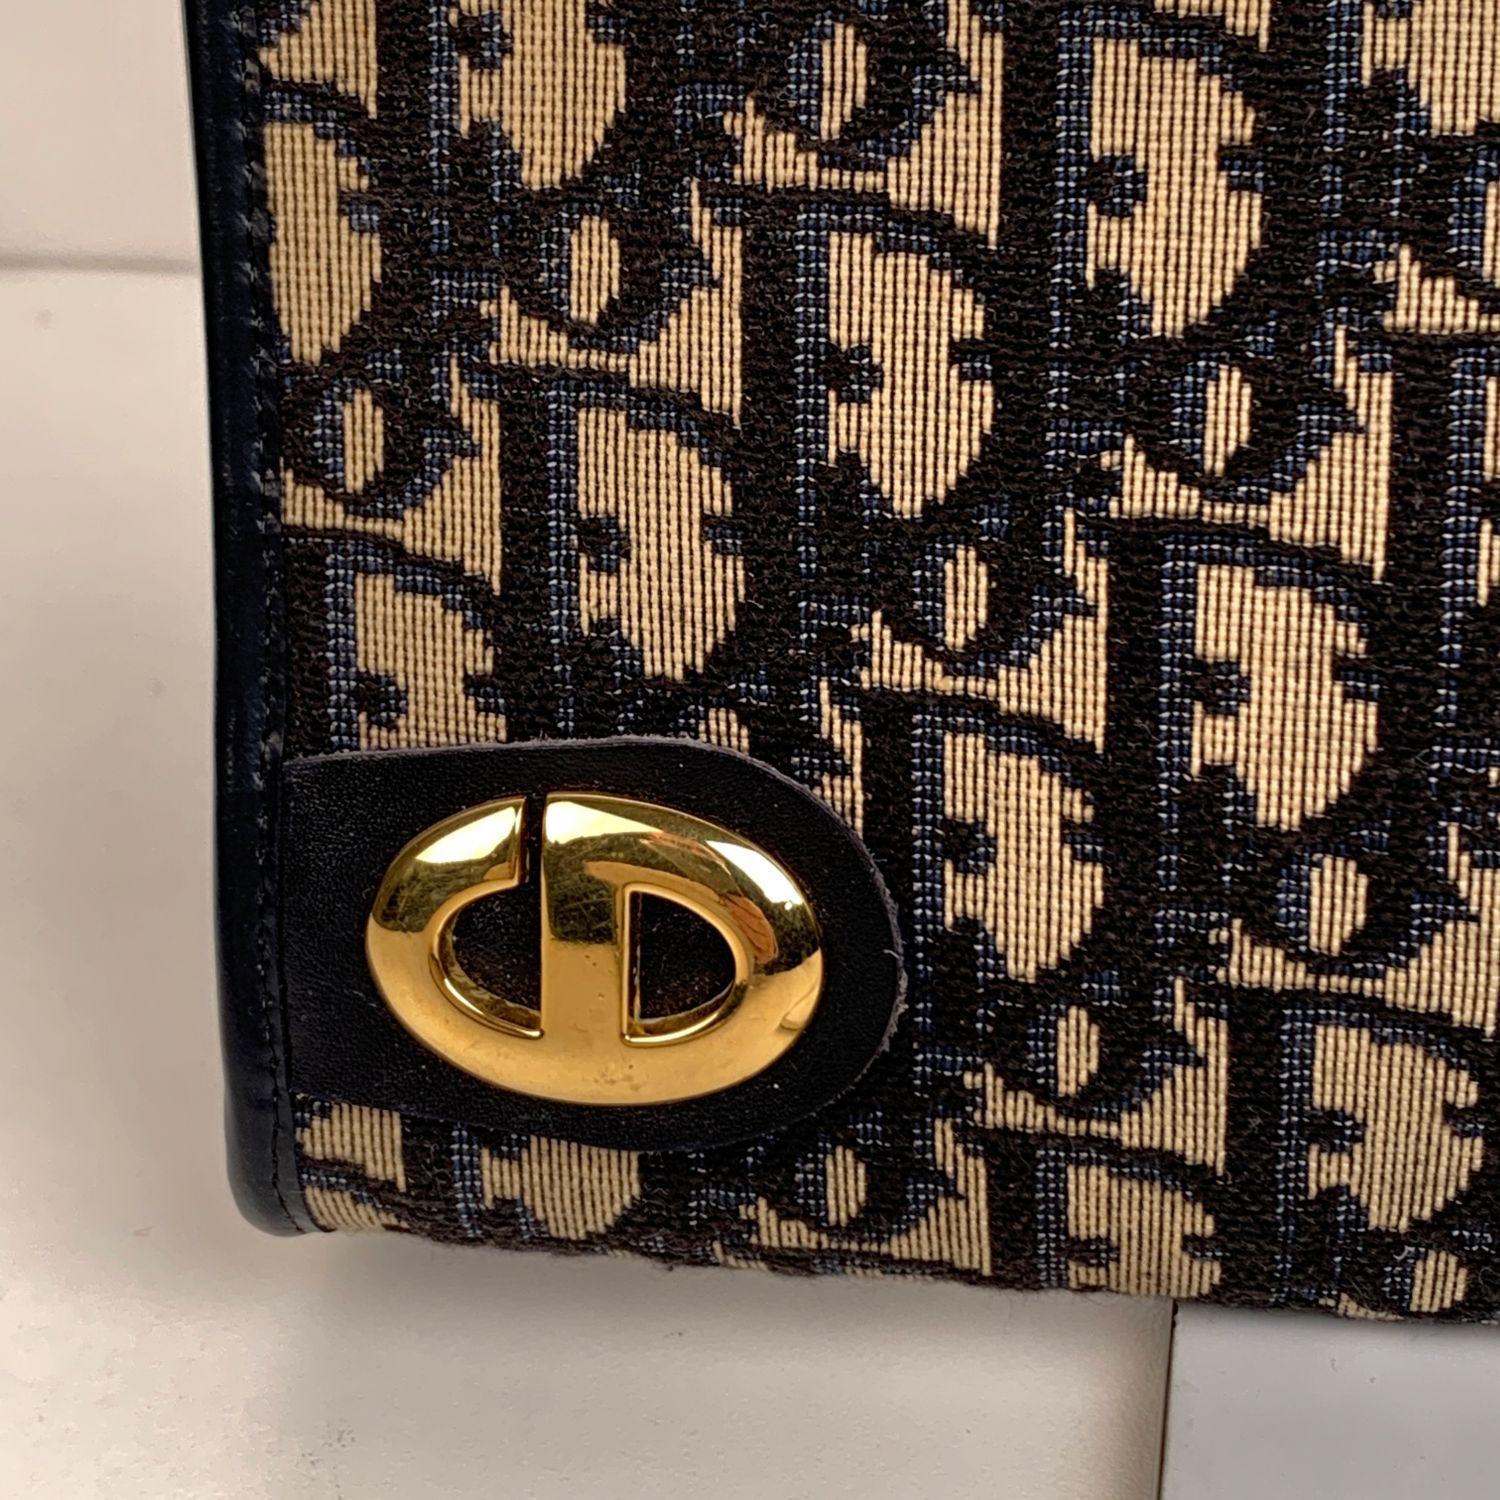 Vintage CHRISTIAN DIOR blue 'Diorissimo' tapestry monogram canvas. Clasp closure on top. Blue leather lining. 'Christian Dior - made in France' embossed inside.

Details

MATERIAL: Canvas

COLOR: Blue

MODEL: -

GENDER: Women

COUNTRY OF